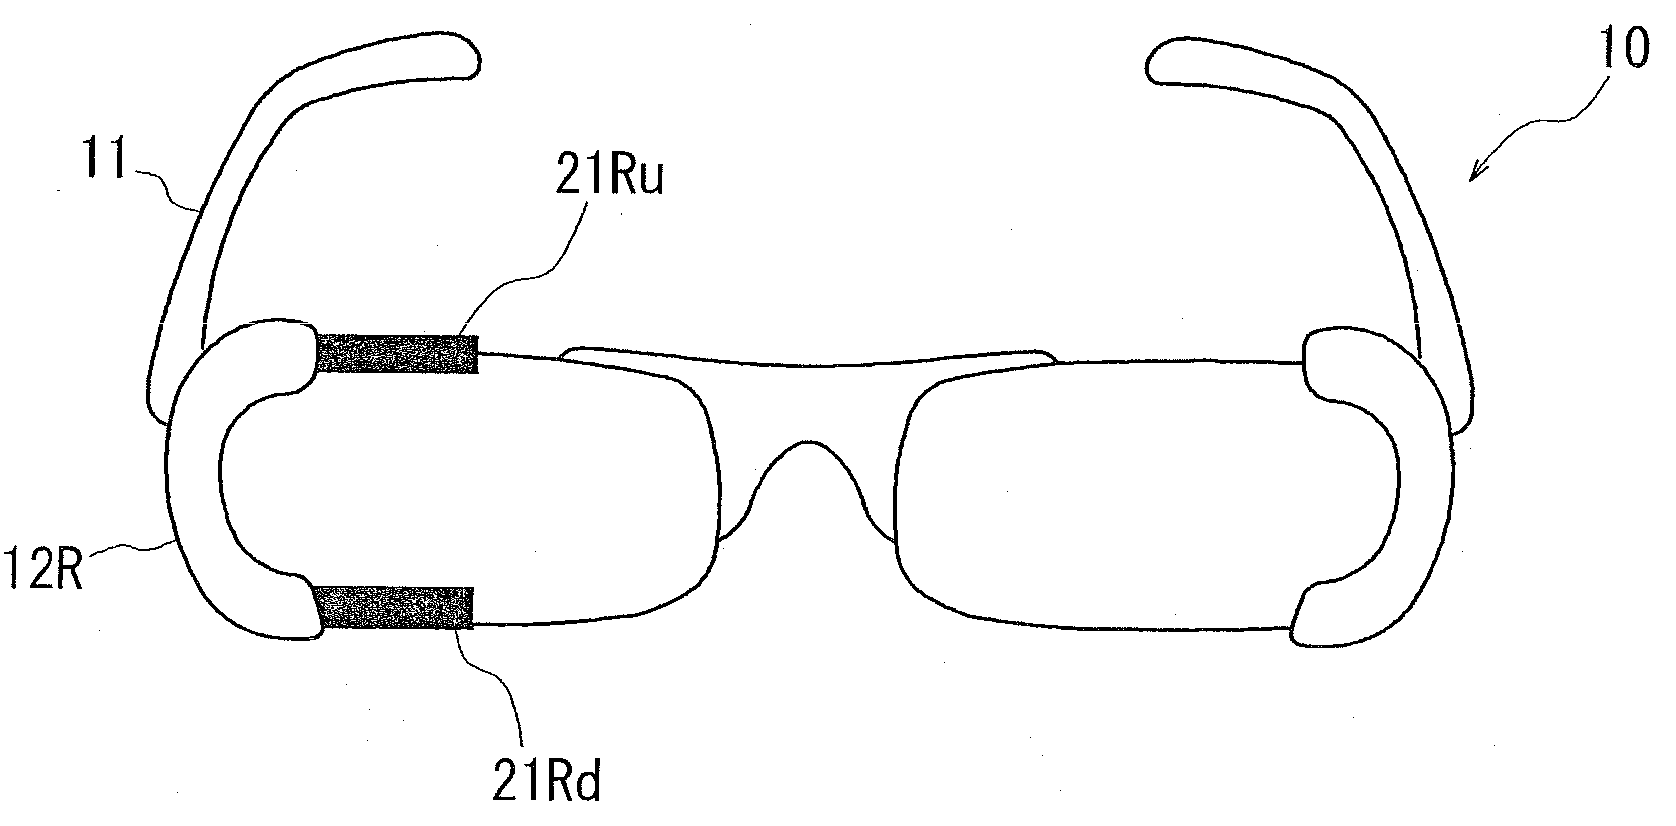 Head-mounted type image display device